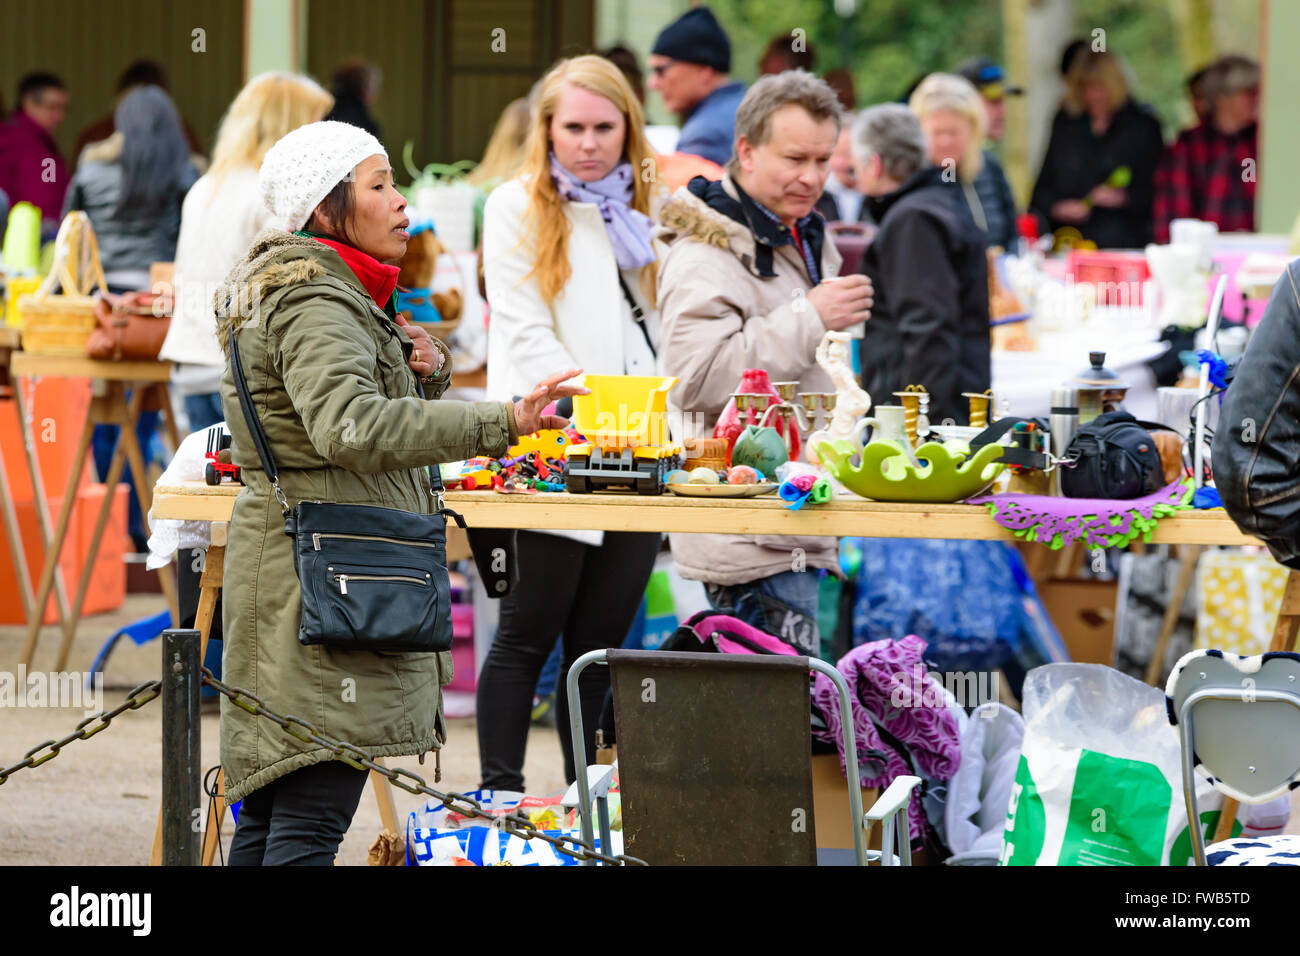 Ronneby, Sweden. 3rd Apr, 2016: Premiere day for the weekly flee market at the old market hall in the public park Ronneby Brunn. This flee market draws people in their thousands hoping to make a bargain or just to enjoy the buzz. The flee market in Ronneby is a tourist attraction throughout the spring, summer and fall. © Ingemar Magnusson / Alamy Stock Photo Stock Photo